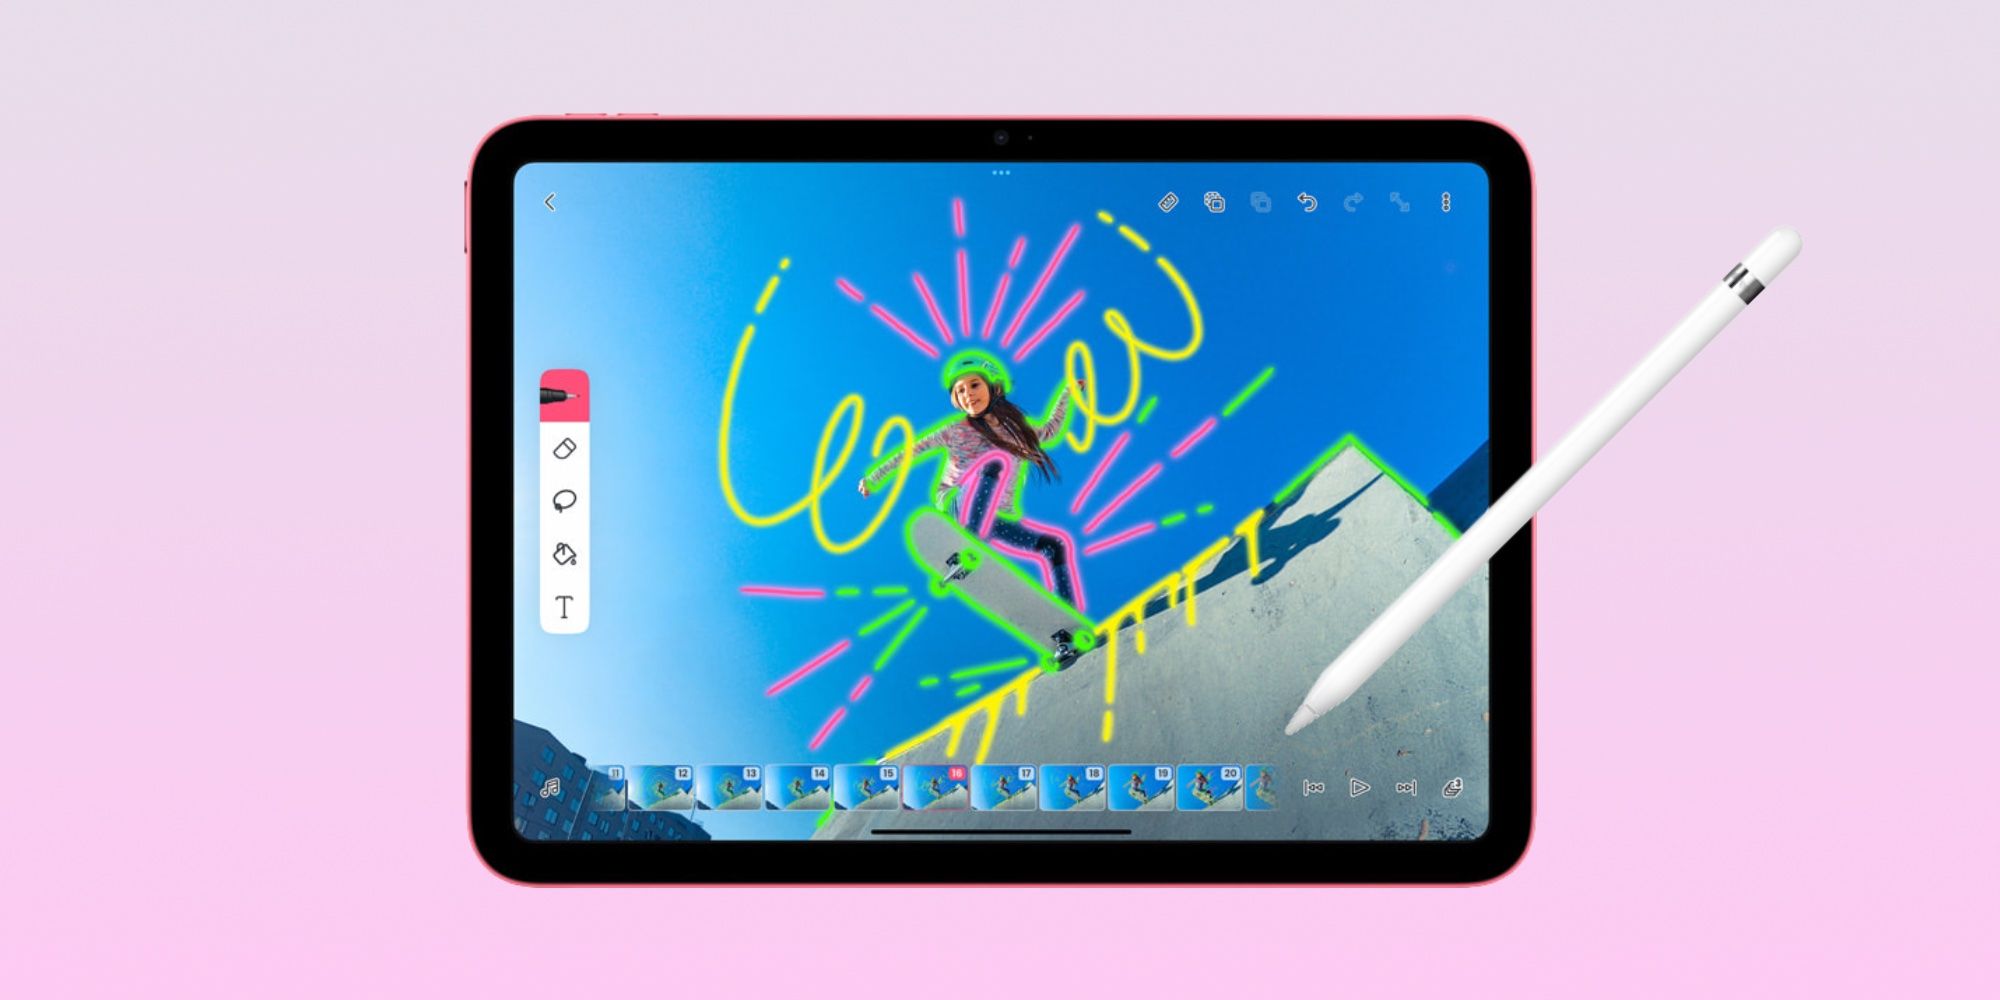 Why doesn't the new iPad (2022) support Apple Pencil 2?